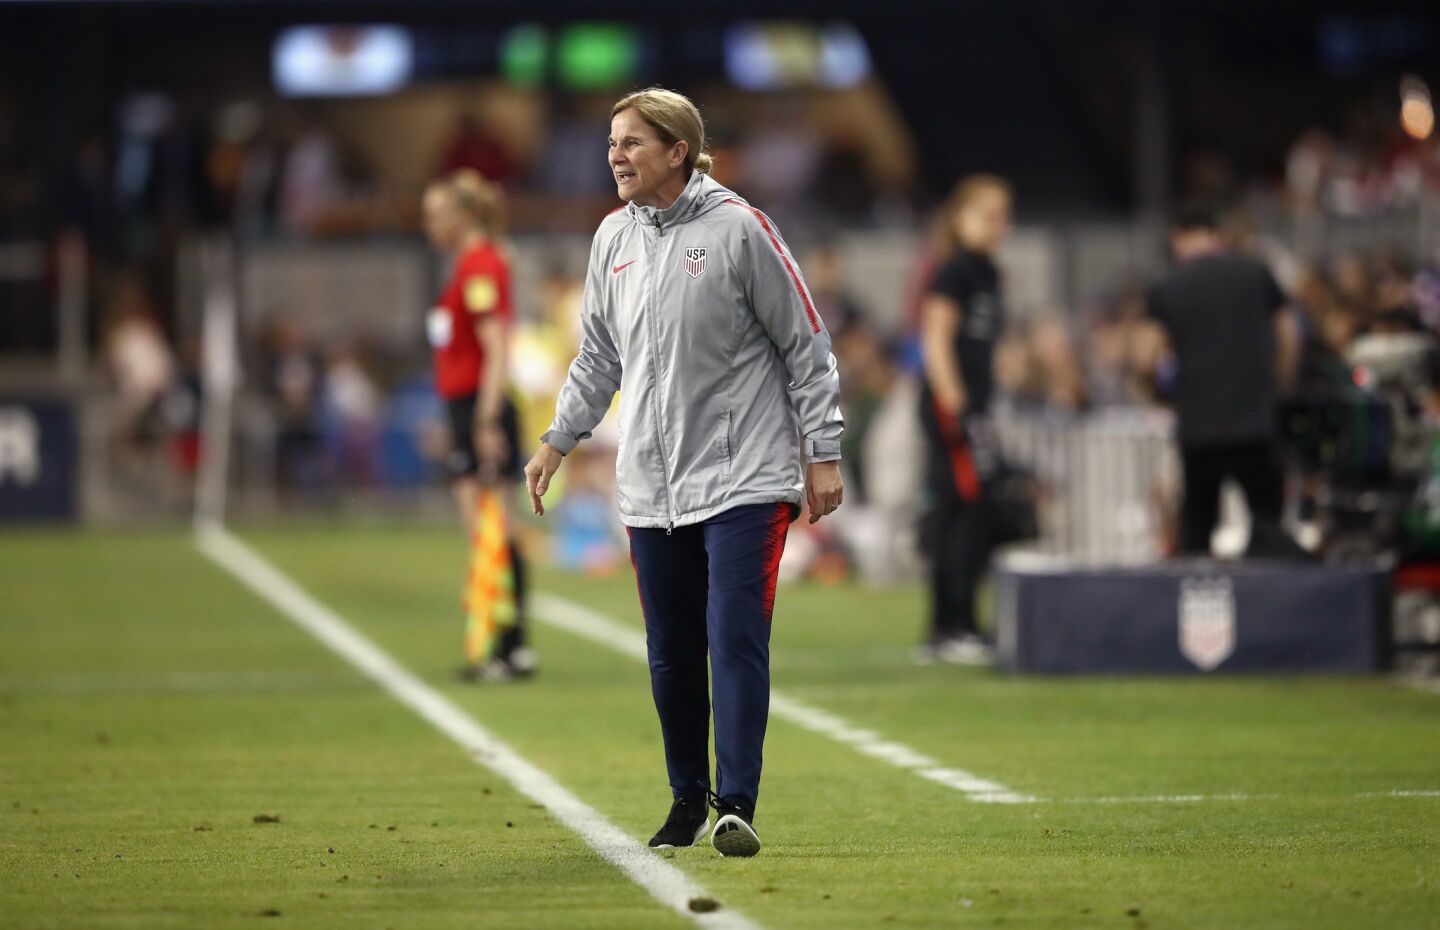 SAN JOSE, CA - SEPTEMBER 04: Head coach Jill Ellis of the United States walks the sidelines during their match against Chile at Avaya Stadium on September 4, 2018 in San Jose, California. (Photo by Ezra Shaw/Getty Images) ** OUTS - ELSENT, FPG, CM - OUTS * NM, PH, VA if sourced by CT, LA or MoD **